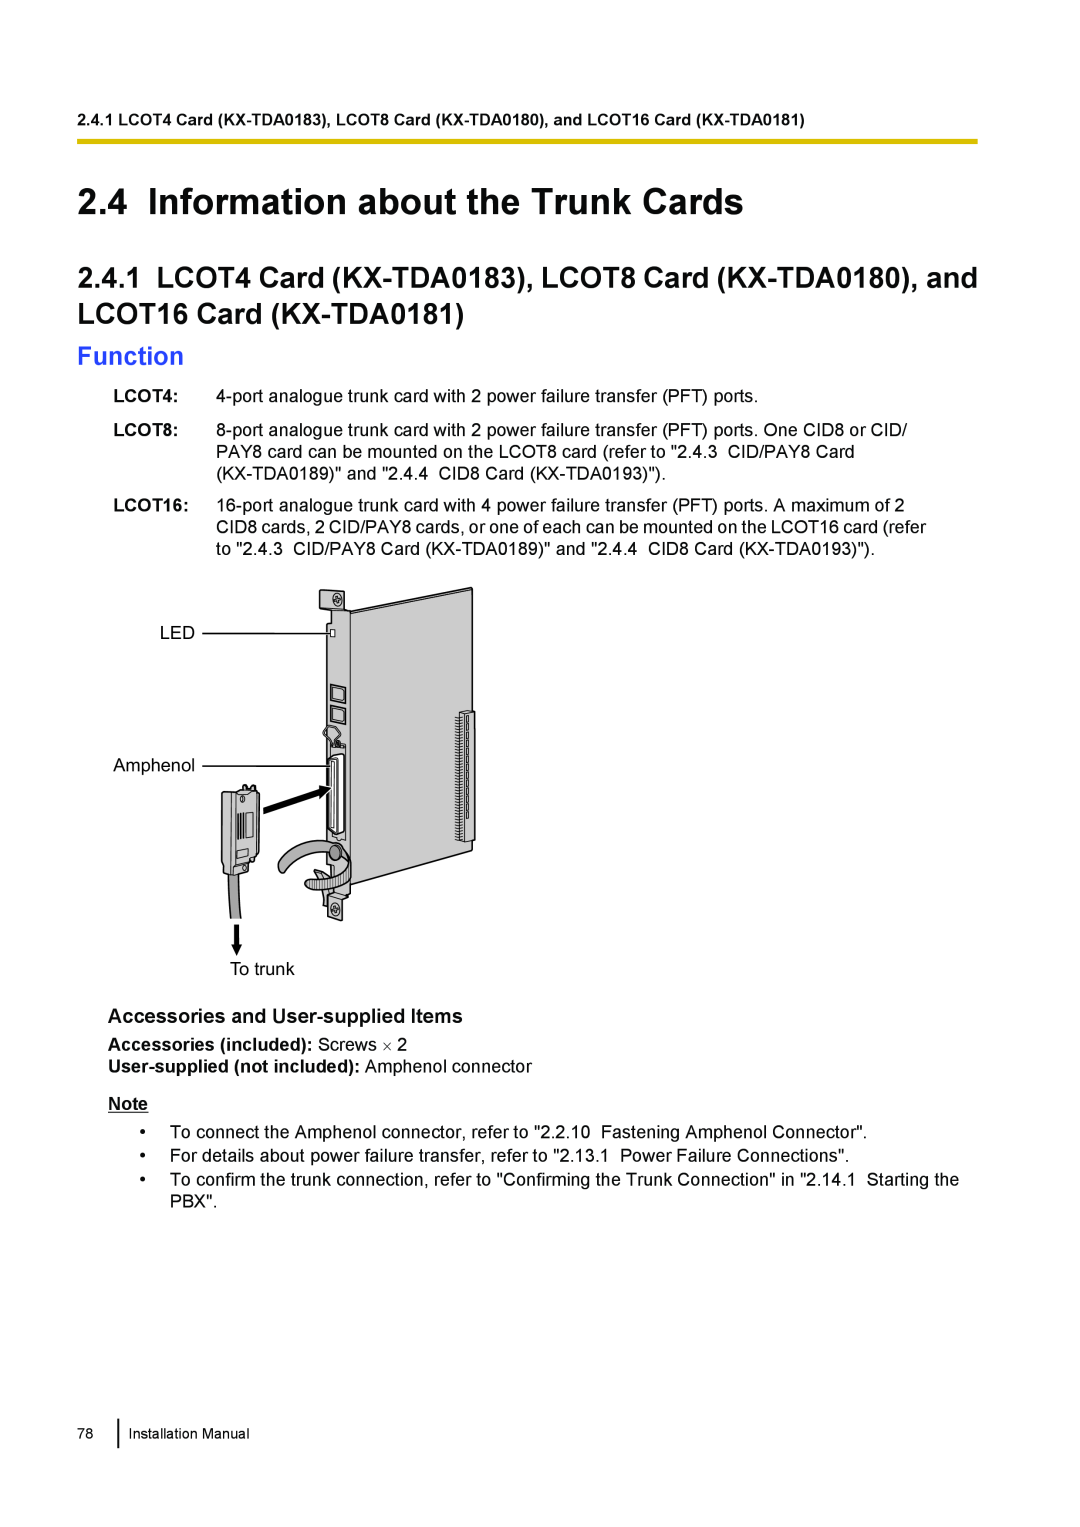 Panasonic KX-TDA100 installation manual Information about the Trunk Cards, Function, Accessories and User-supplied Items 